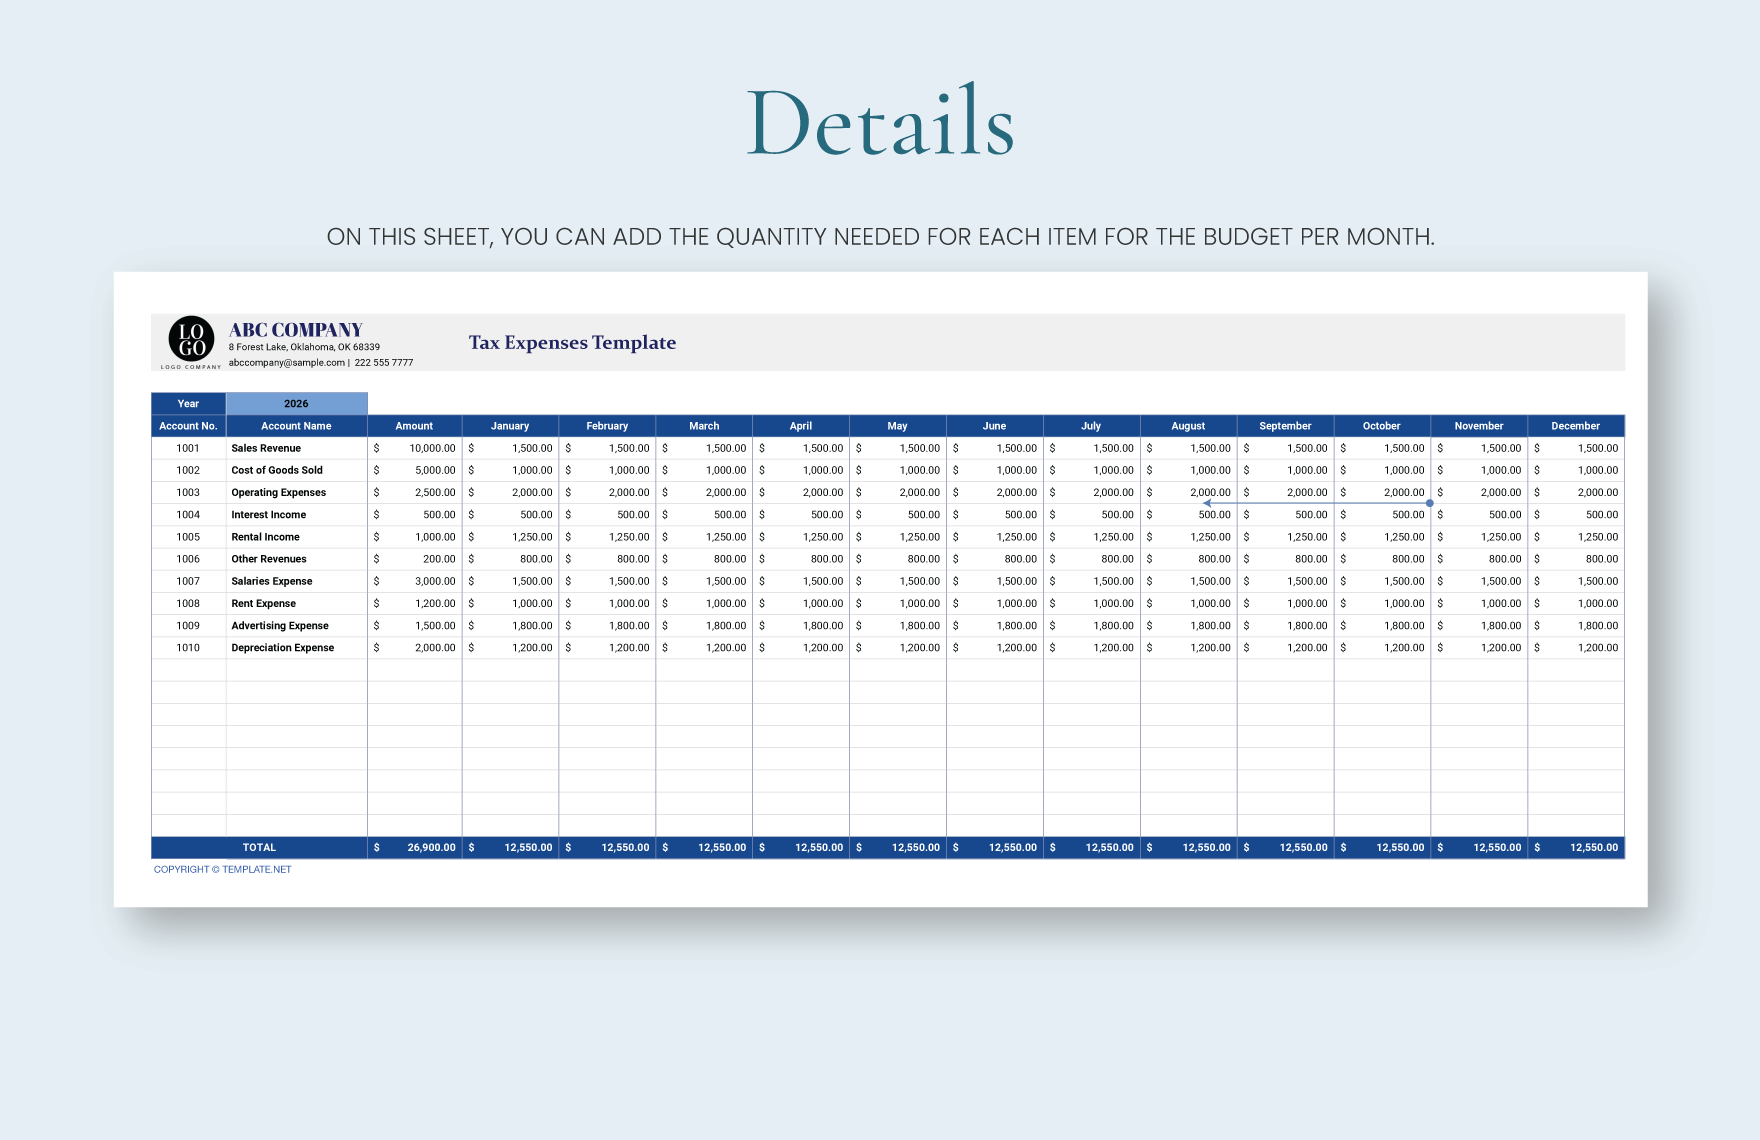 Tax Expenses Template